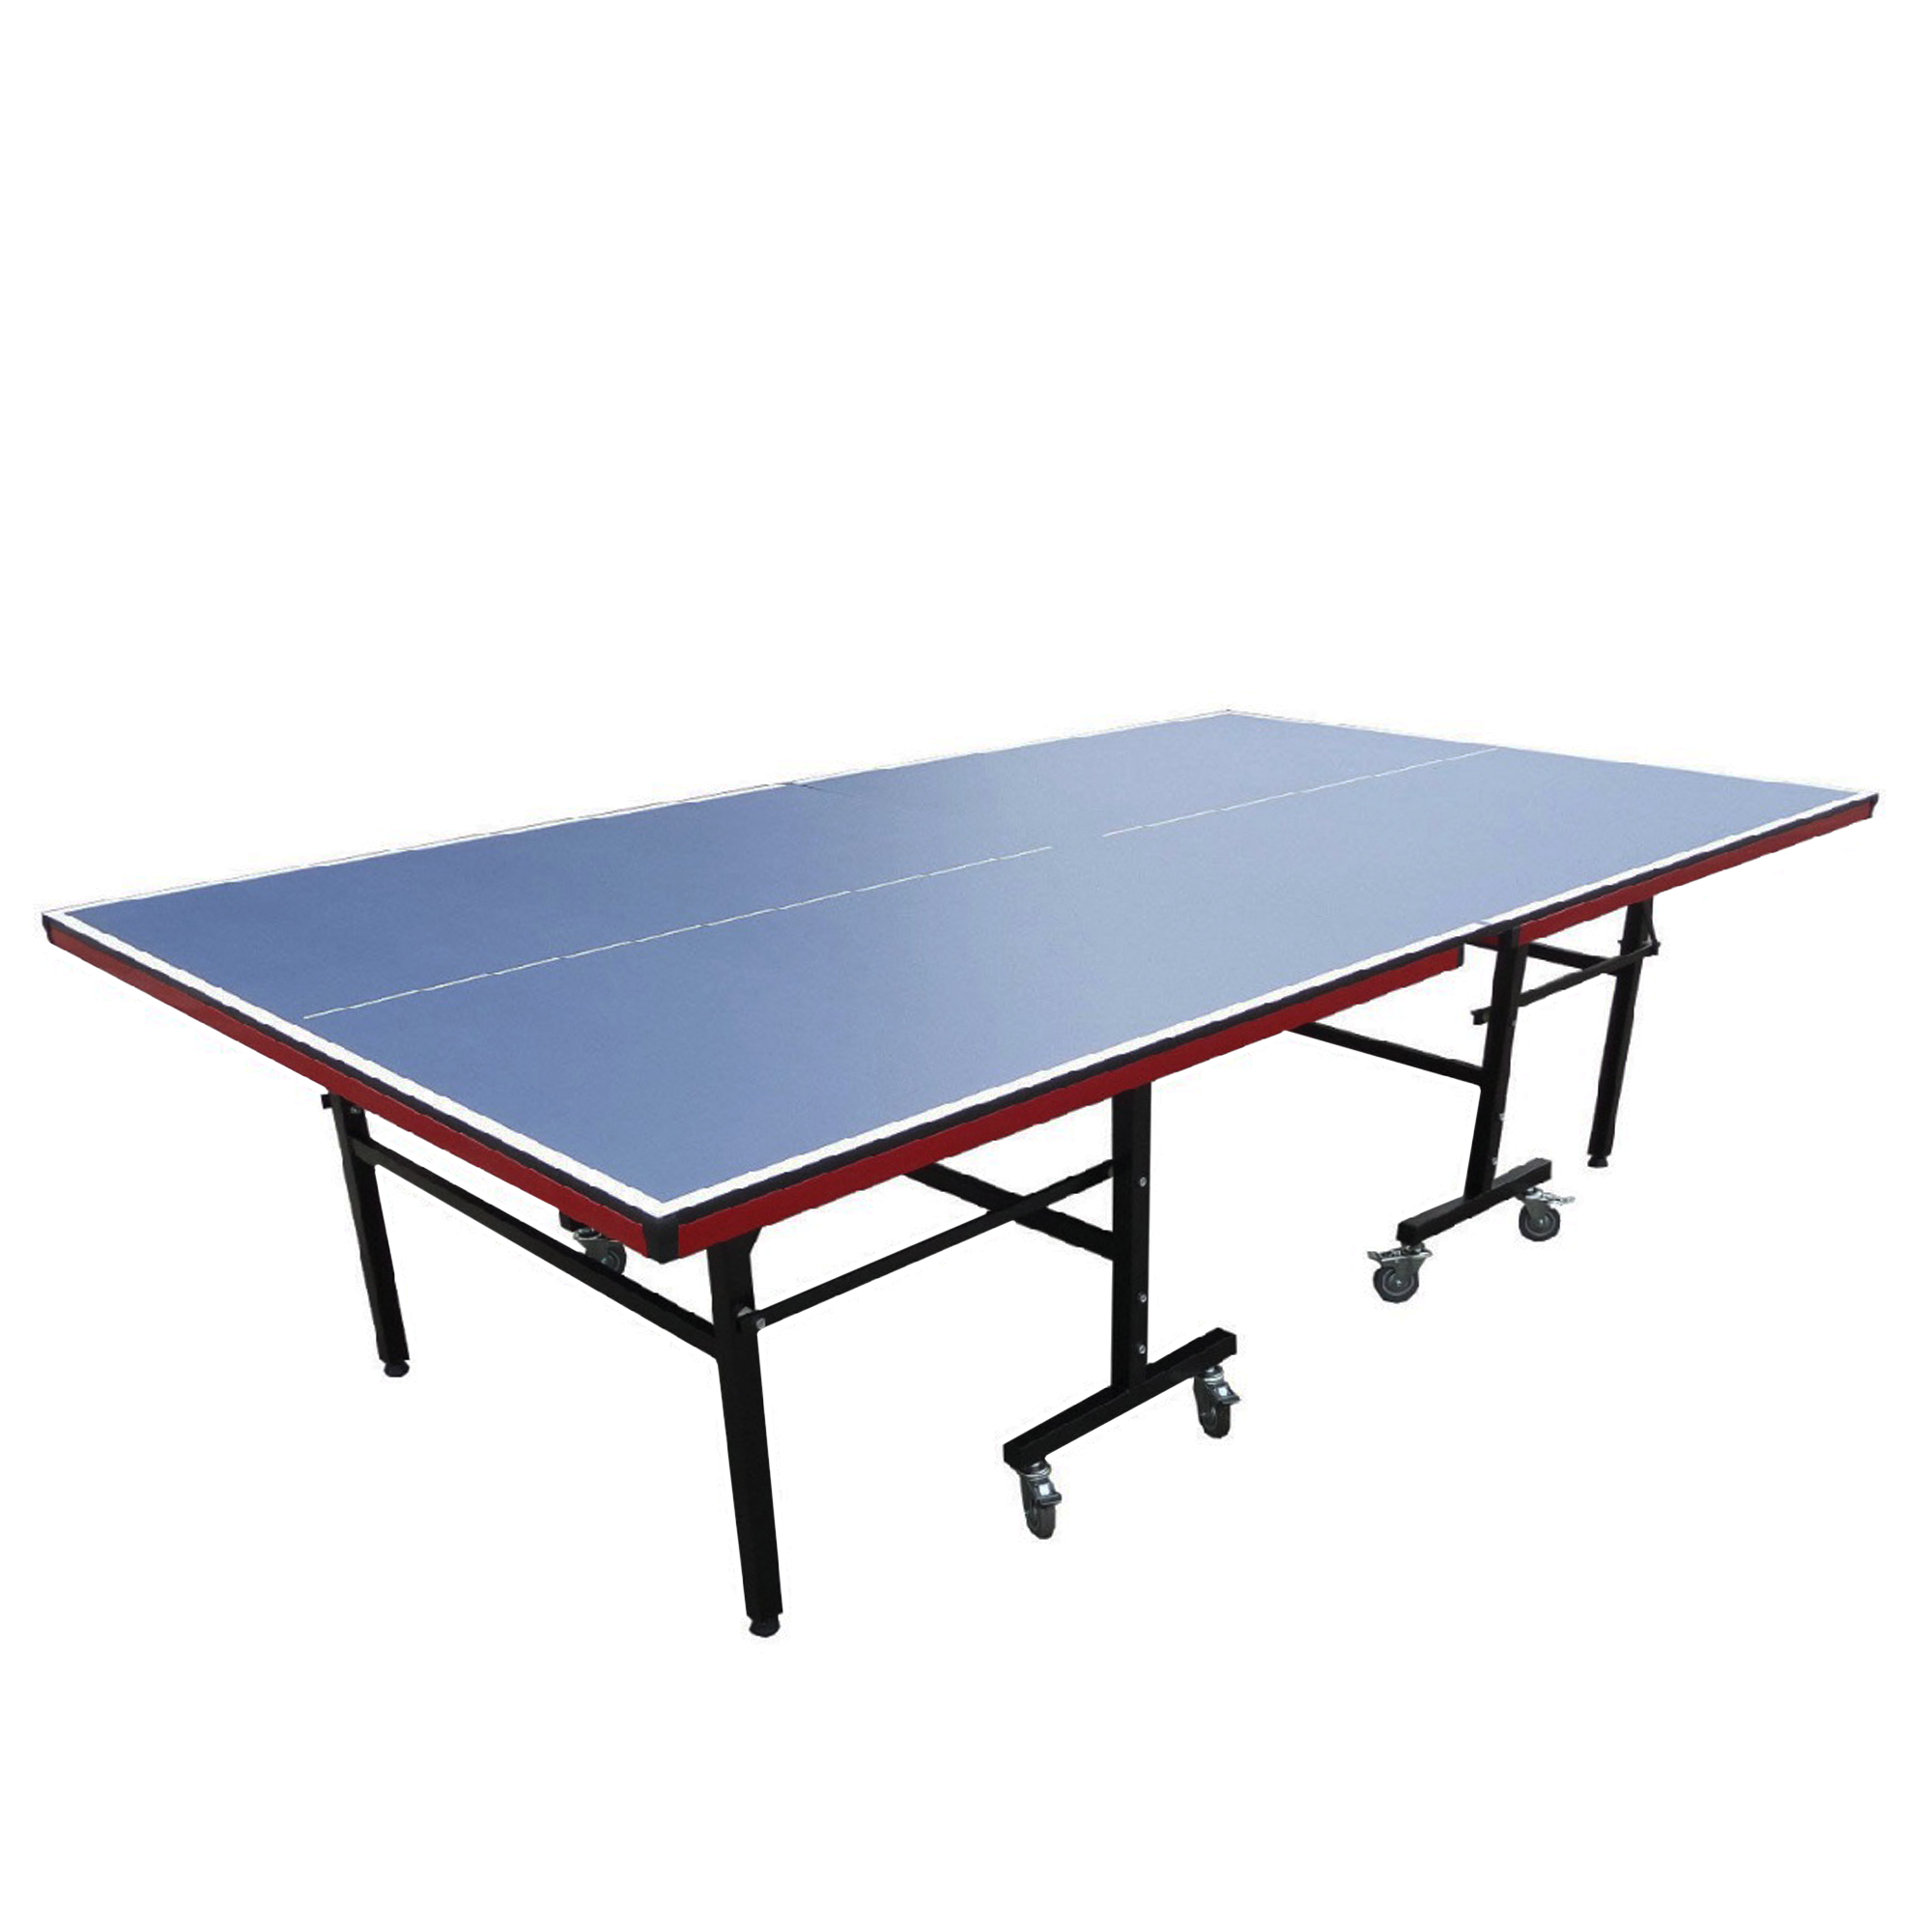 Pool Central 9' Table Tennis or Ping Pong Game Table